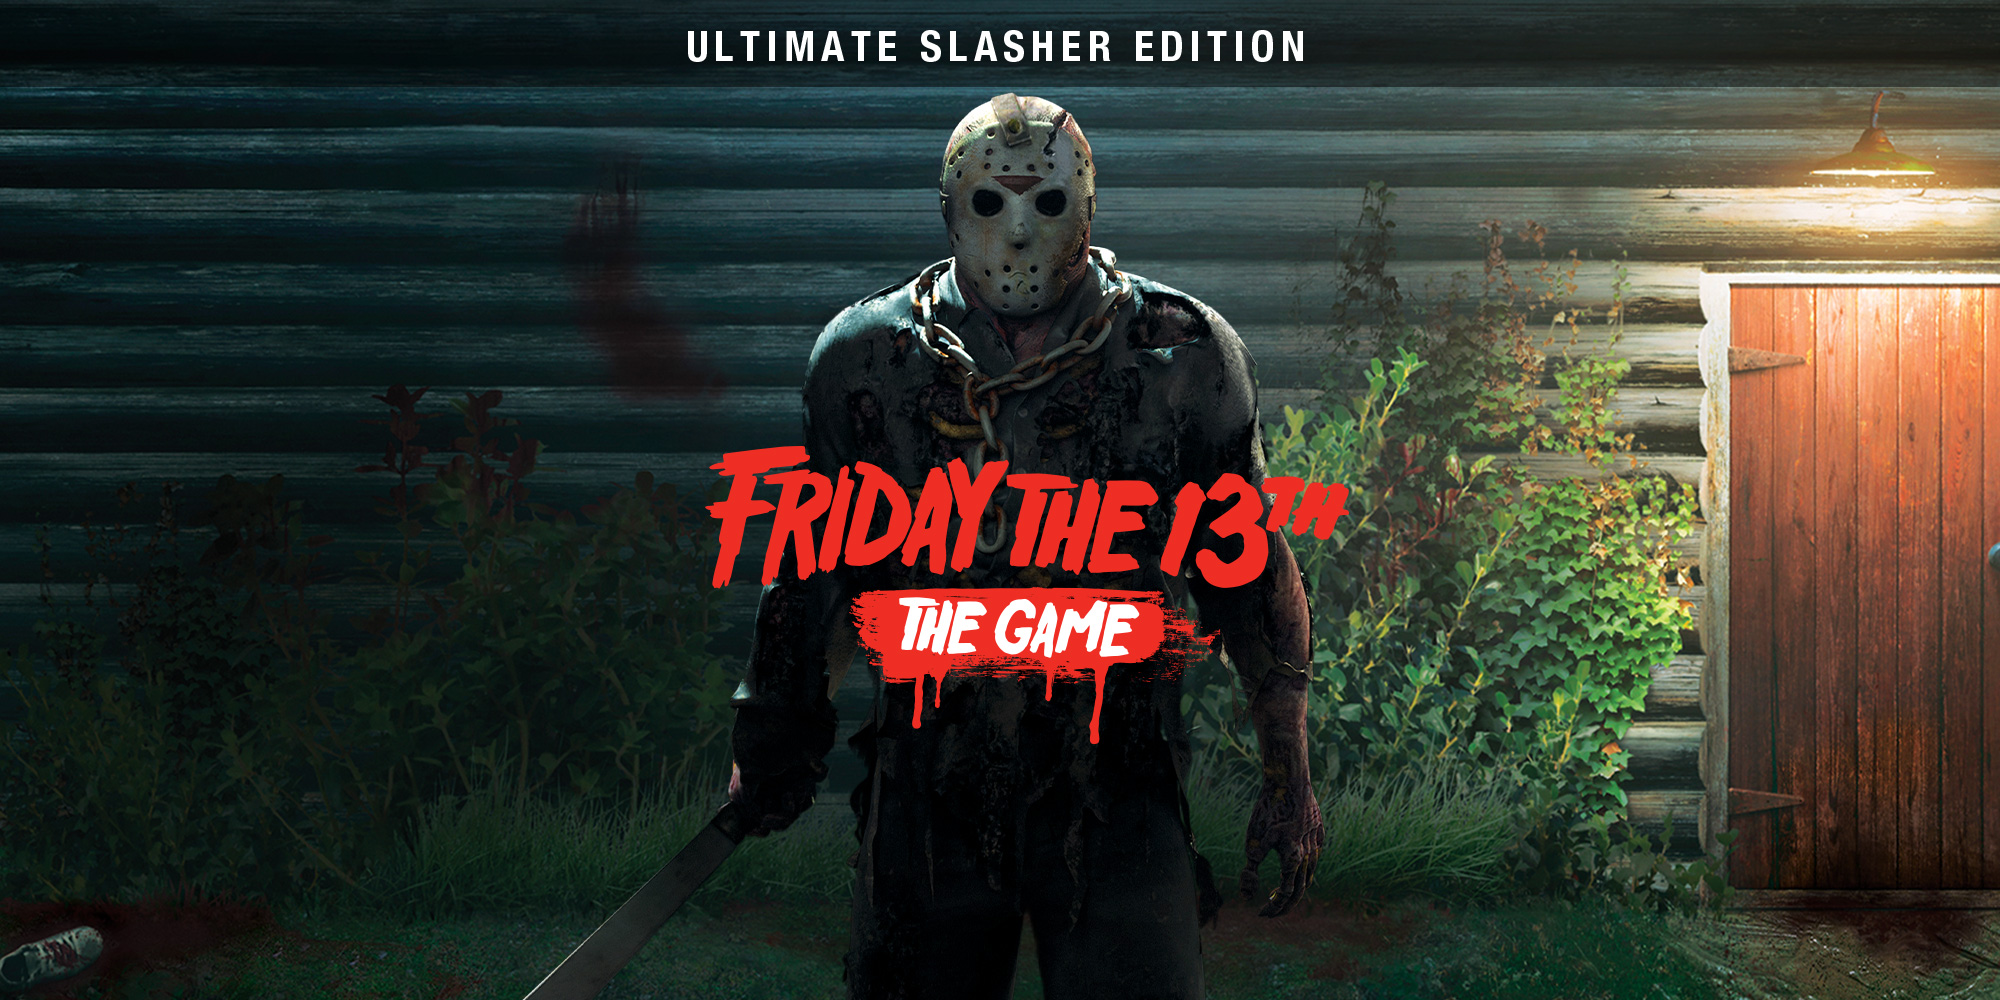 You are currently viewing Геймплей Switch-версии Friday the 13th: The Game Ultimate Slasher Edition